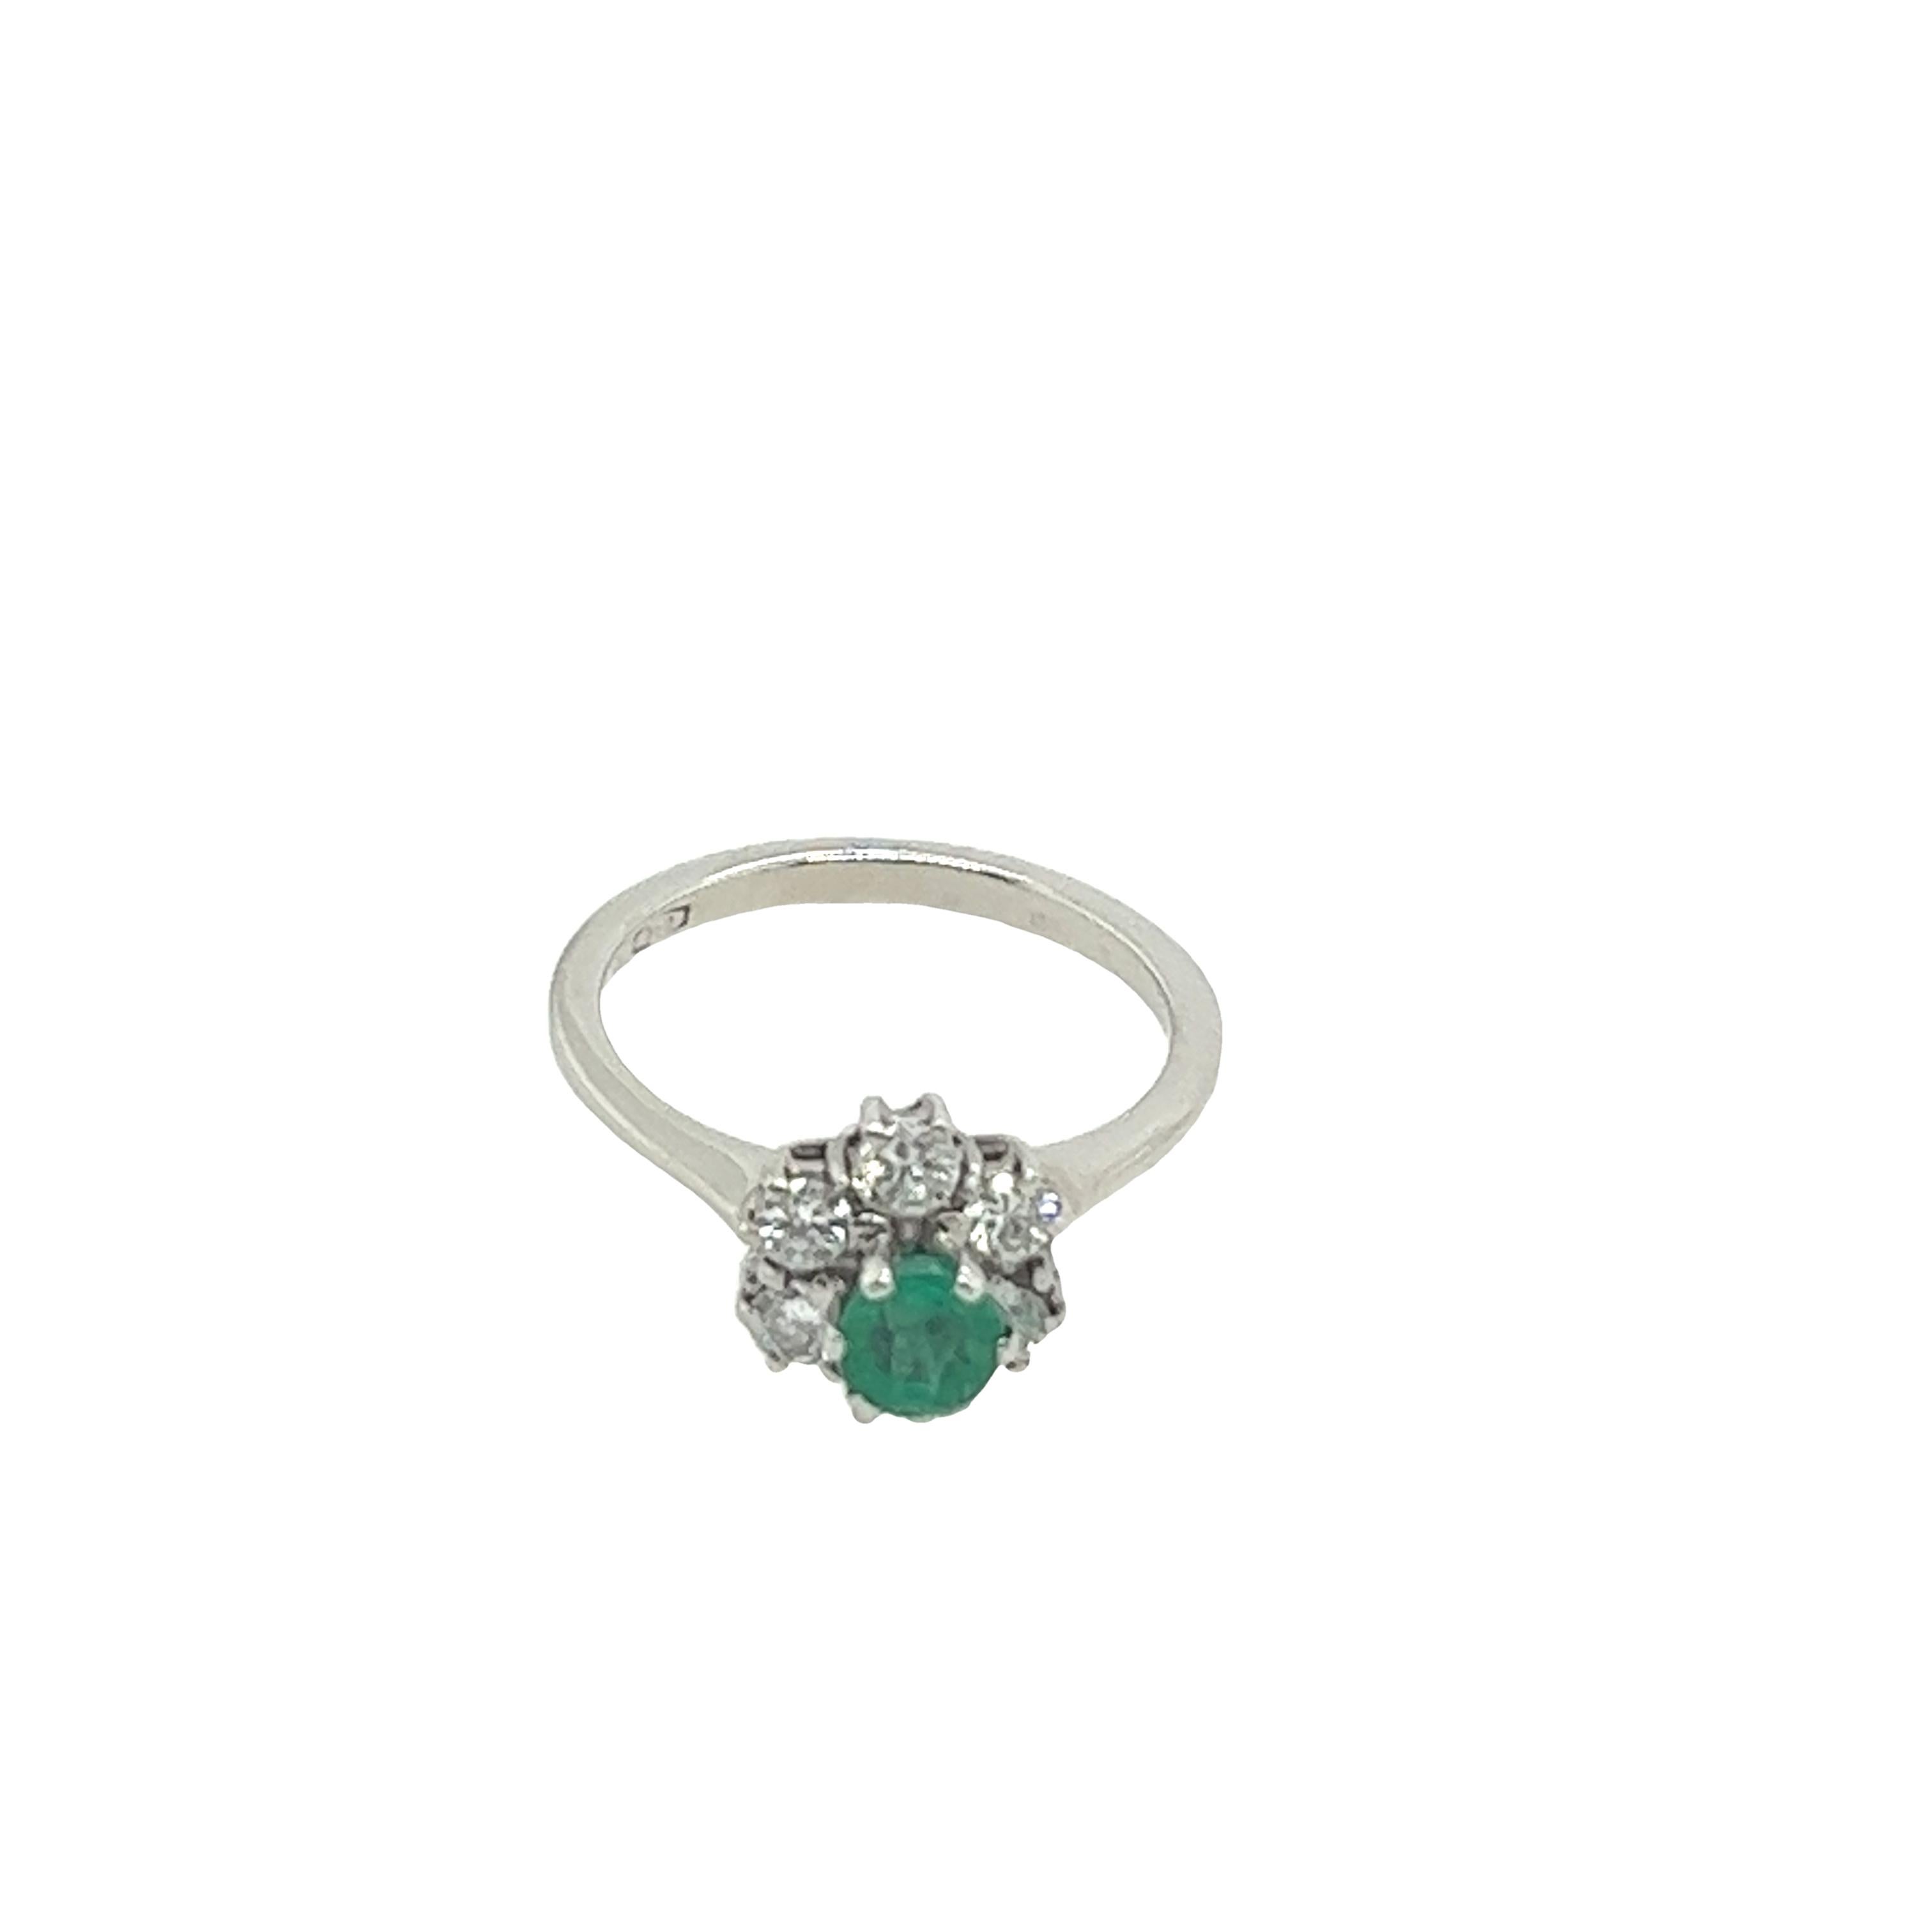 This gorgeous 18ct white gold emerald ring is set with 0.35ct natural round diamonds. 
The emerald is a rich green, the diamonds complement the emerald, and together they symbolize the eternal love.
Total Diamond Weight: 0.35ct 
Diamond Colour: